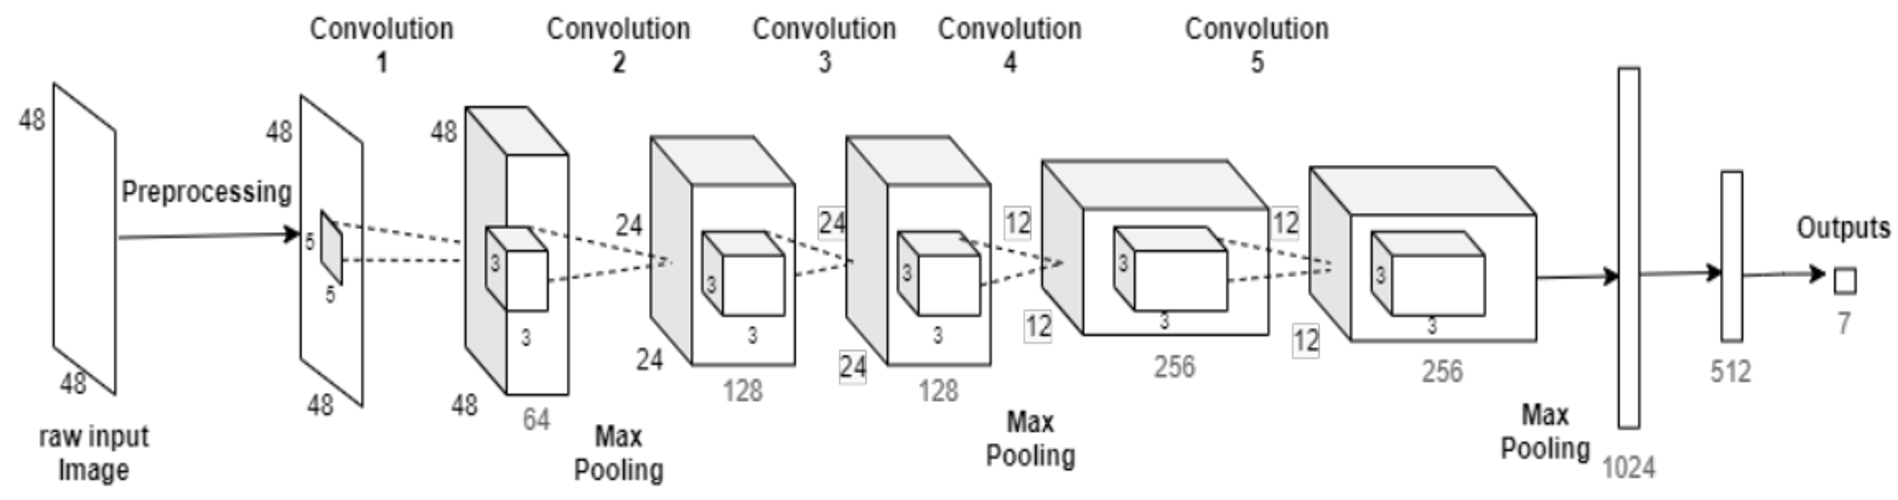 CNN model architecture: 5 convolutional layers, 3 max pooling layers, and 3 fully connected layers